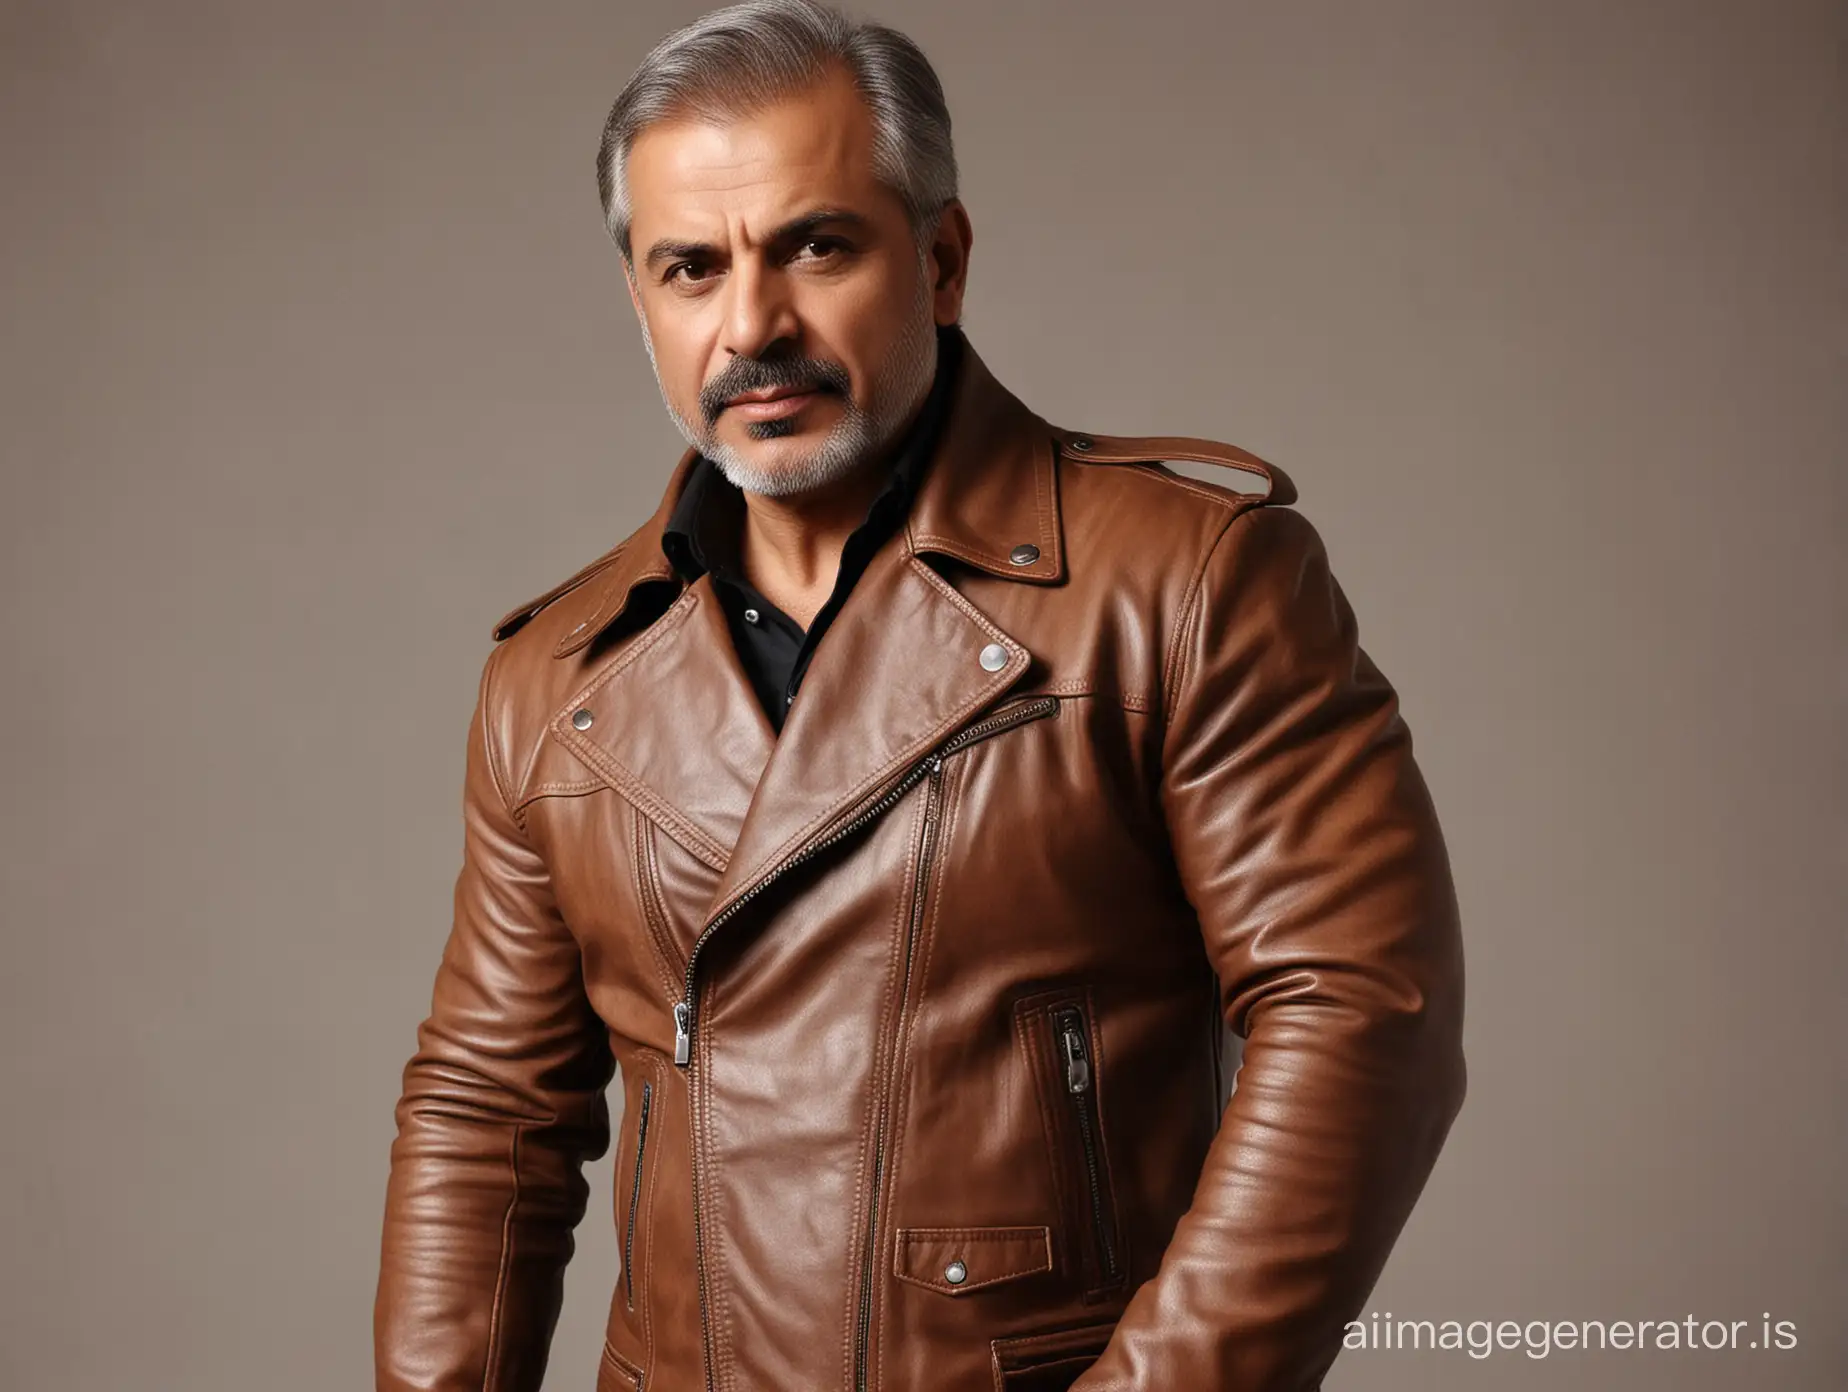 hot and sexy muscular body, biceps  chest and body shahbaz sharif
 in fuller beard enjoying in brown leather jacket
